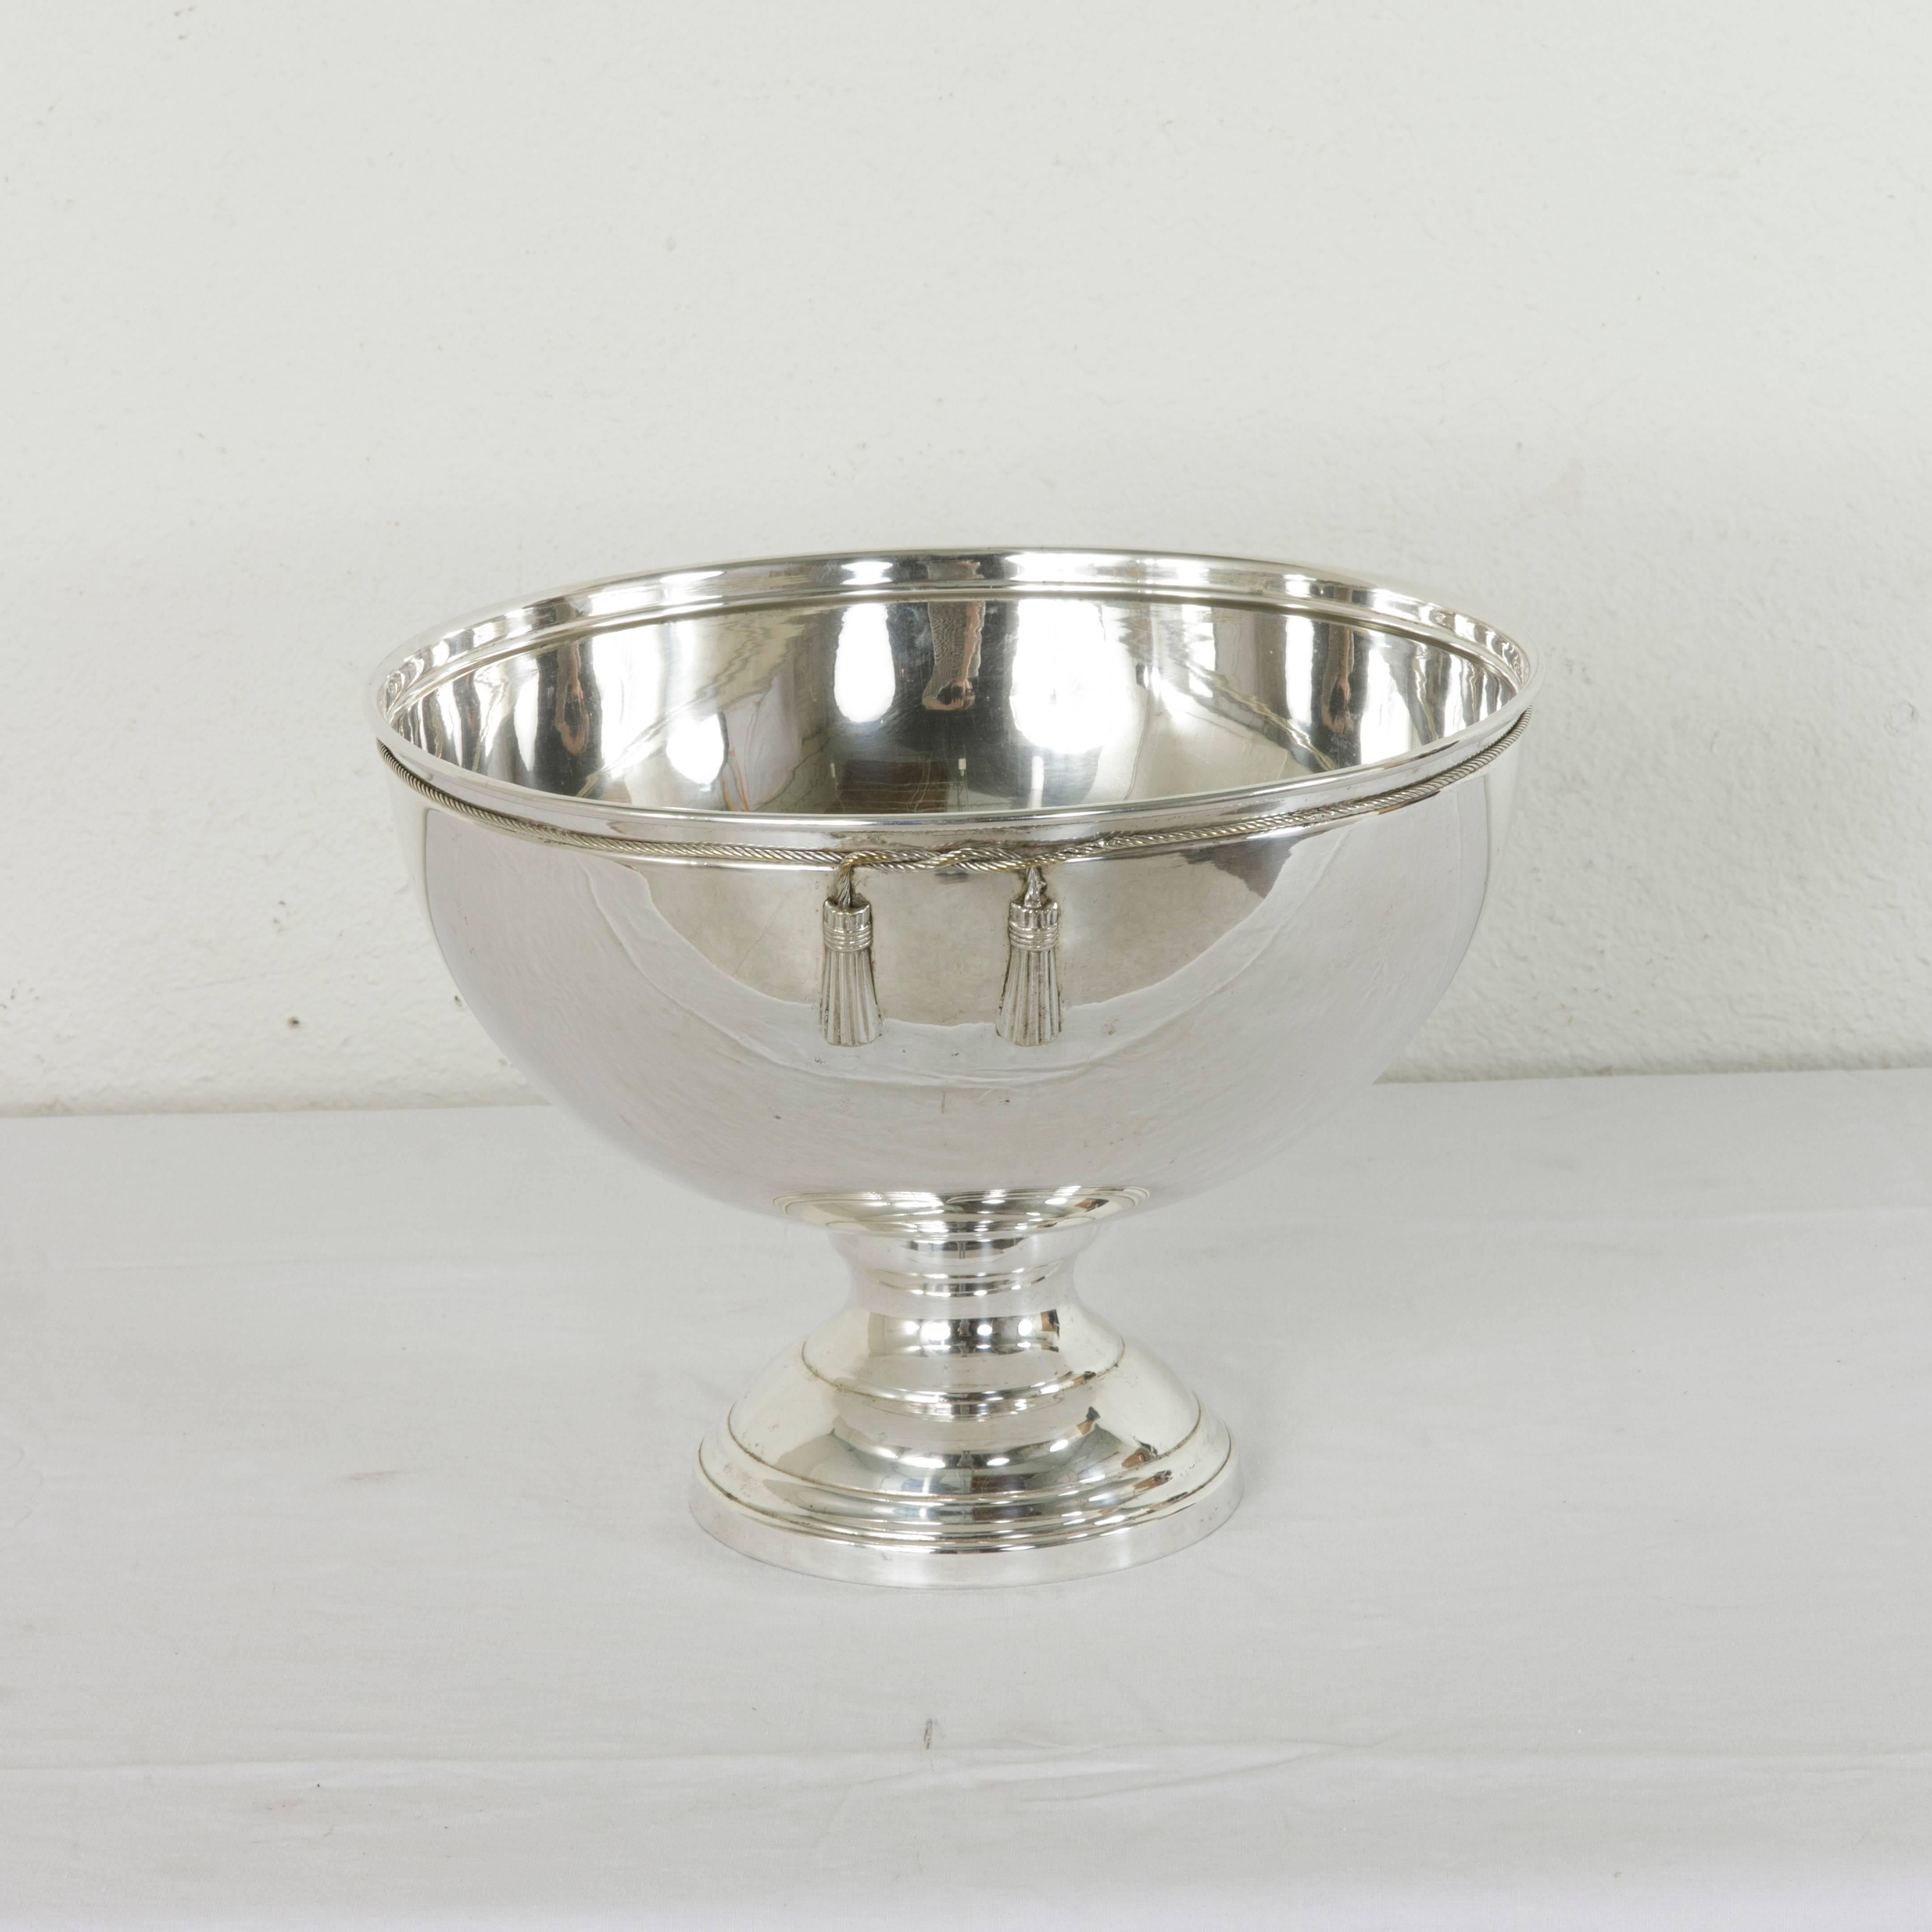 Mid-20th Century French Silver Plate Hotel Champagne Bucket for Four Bottles 4